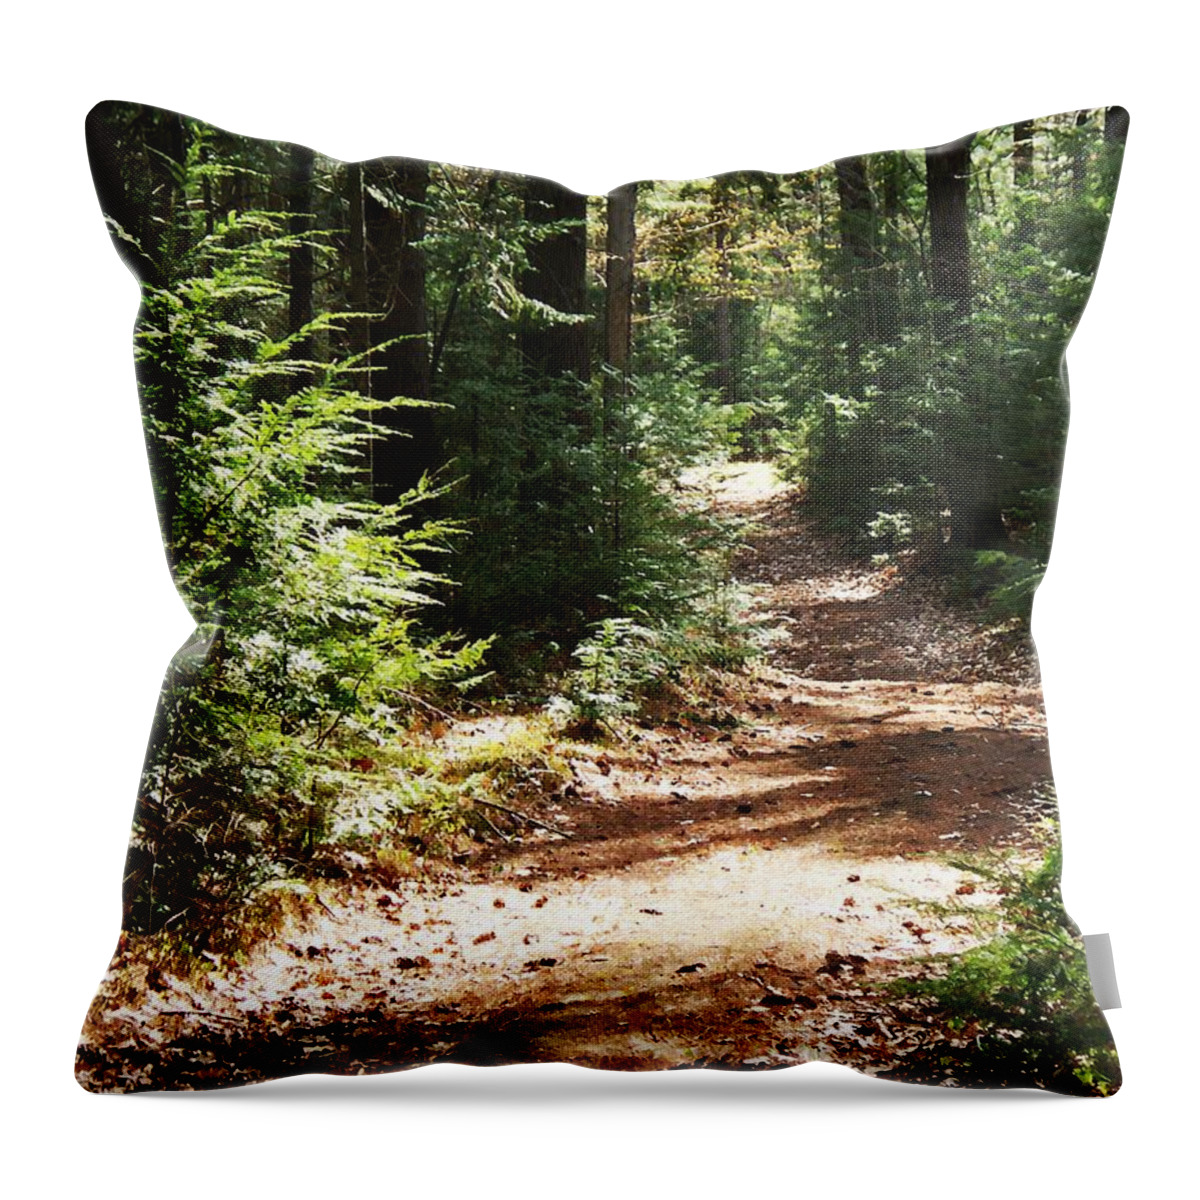 Photography Throw Pillow featuring the photograph A Walk In The Woods by Joy Nichols